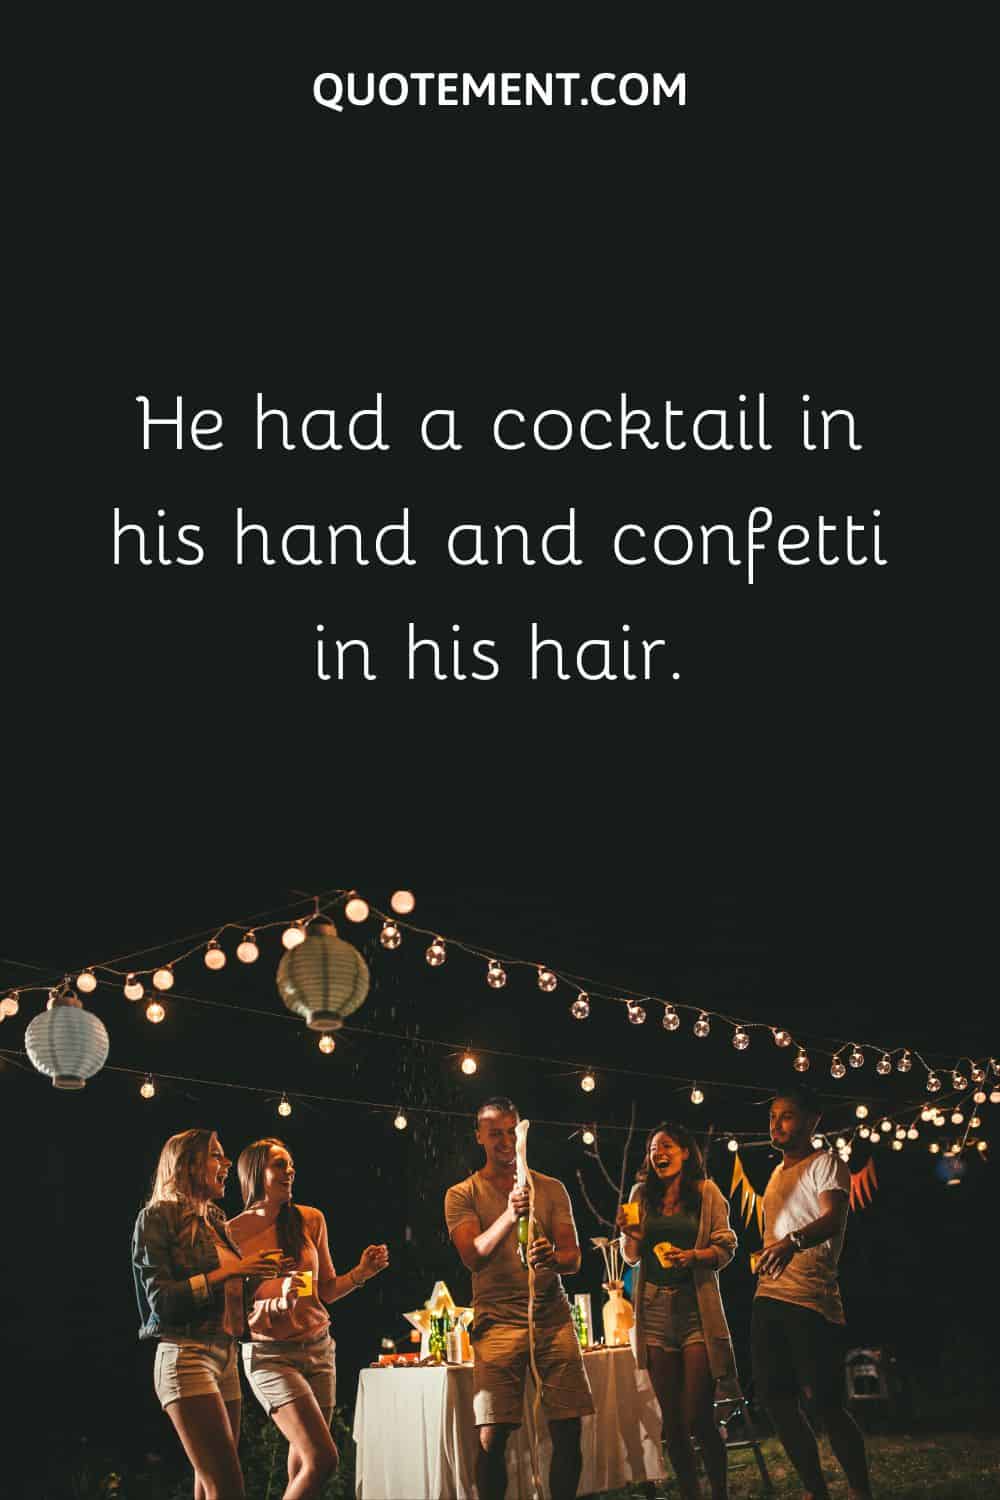 He had a cocktail in his hand and confetti in his hair